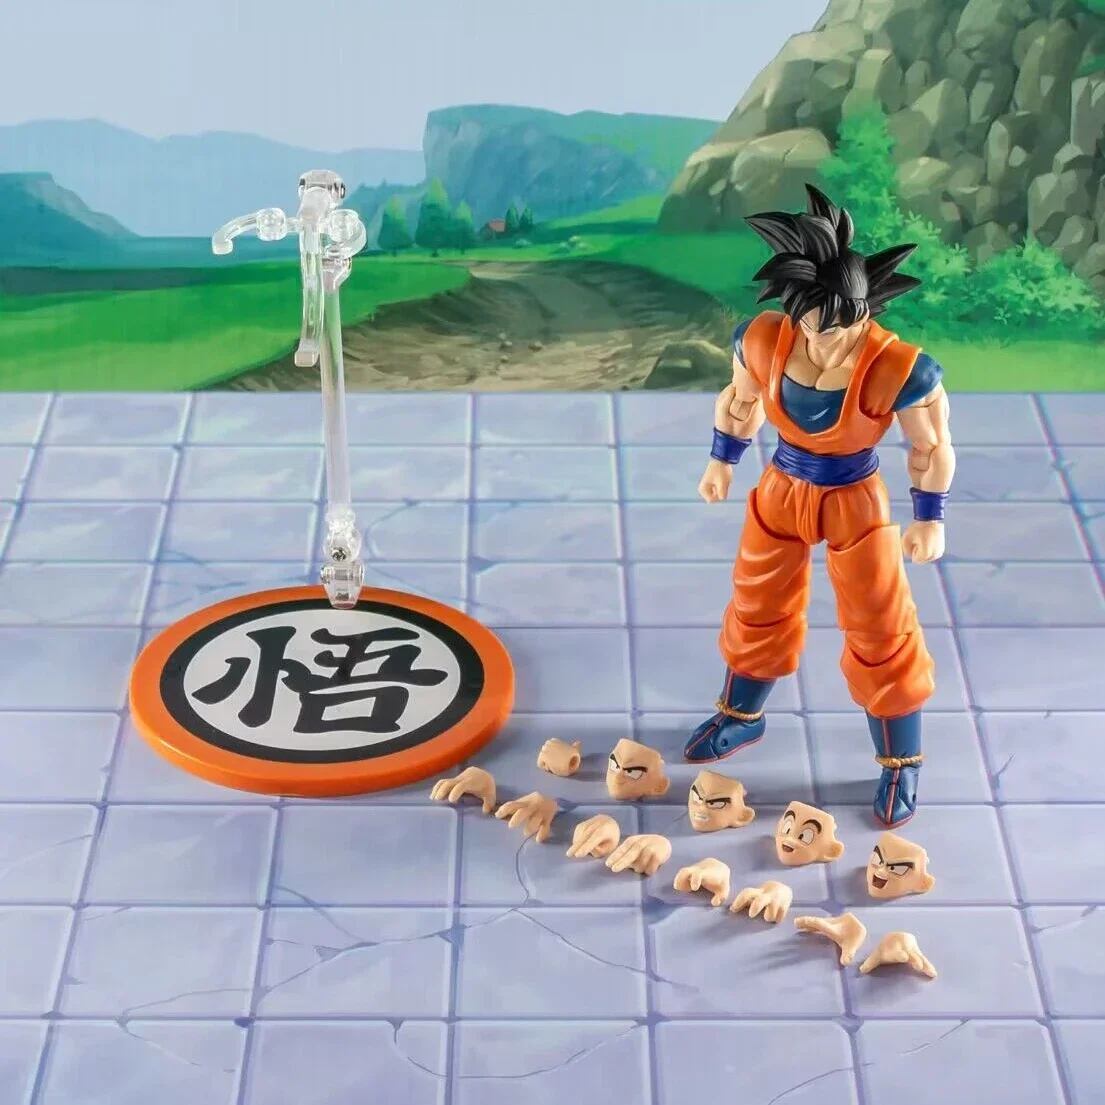 N stock dragon ball demoniacal fit df shf martialist forever 3 0 son goku action figure thumb200